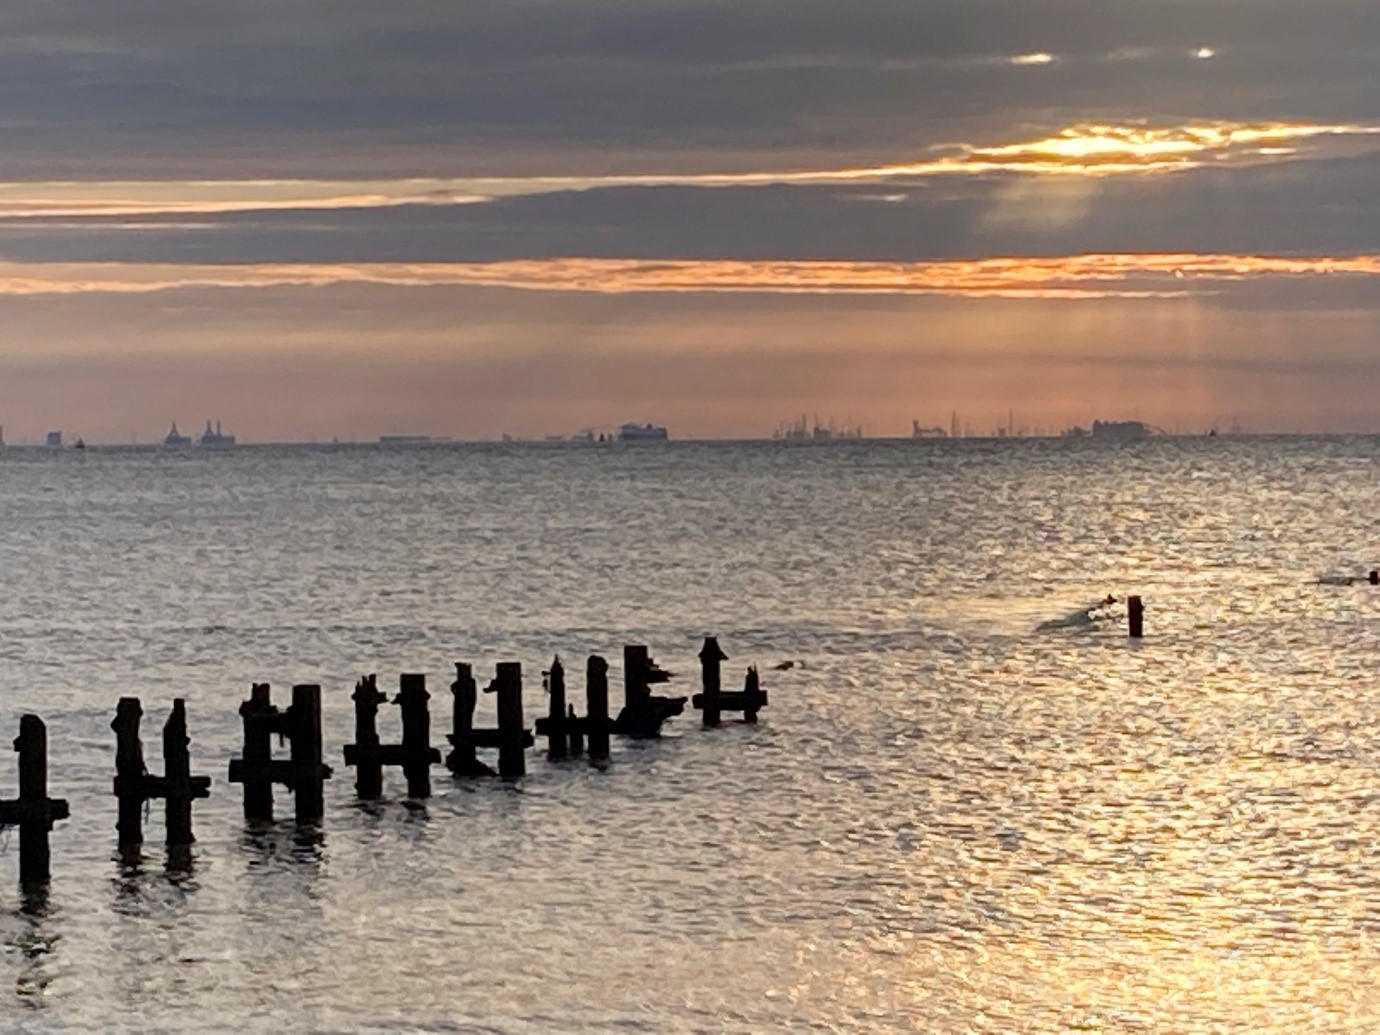 A view from Spurn Point towards the south bank of the Humber showing remnants of a pier